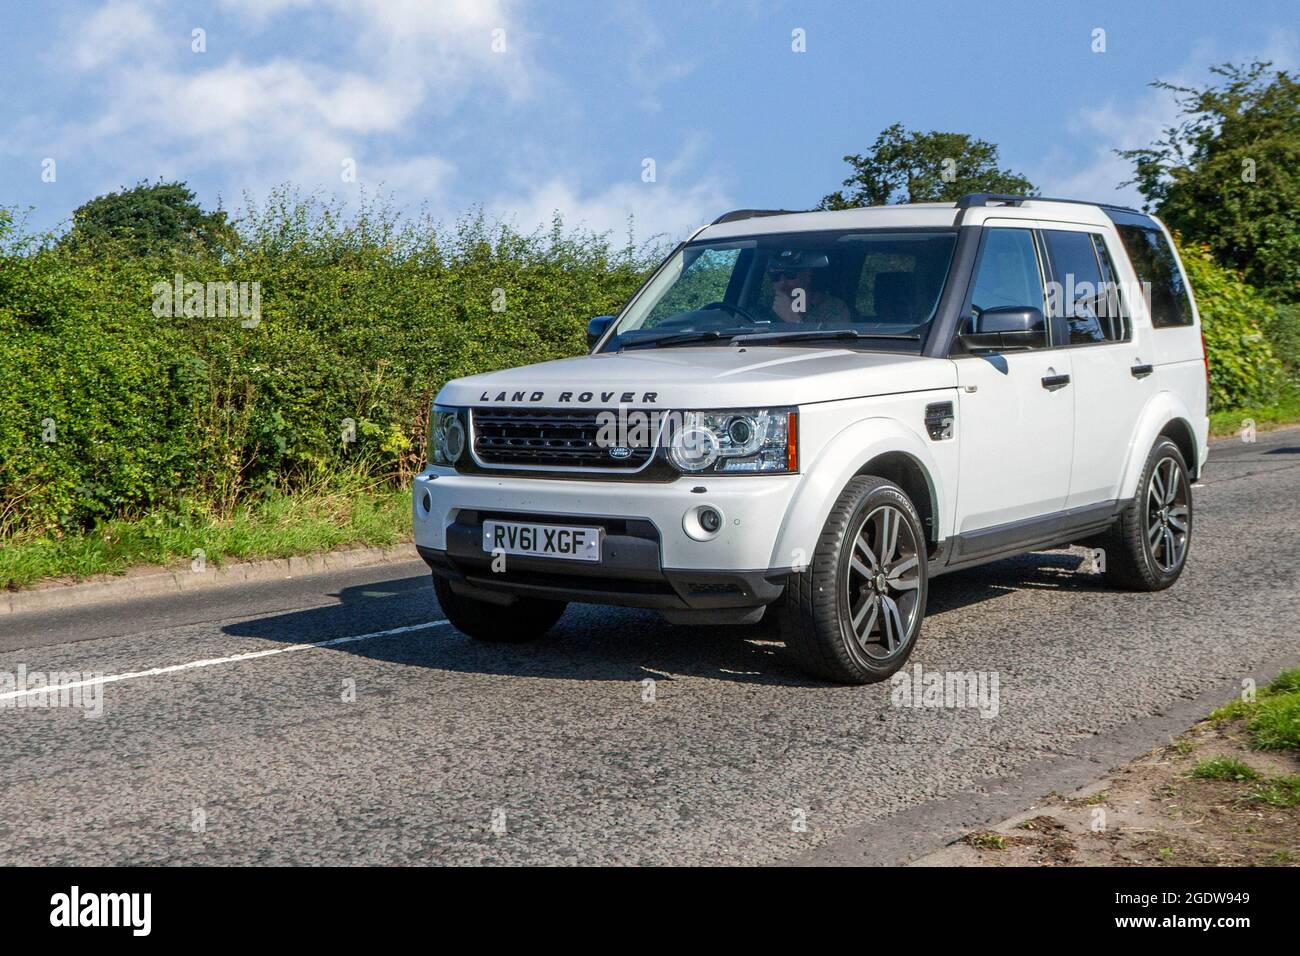 2011 Fuji White Land Rover Discovery SDV6 Landmark LE 6 speed 3.0 litre SDV6 twin-turbo diesel engine automatic, en-route to Capesthorne Hall classic July car show, Cheshire, UK Stock Photo